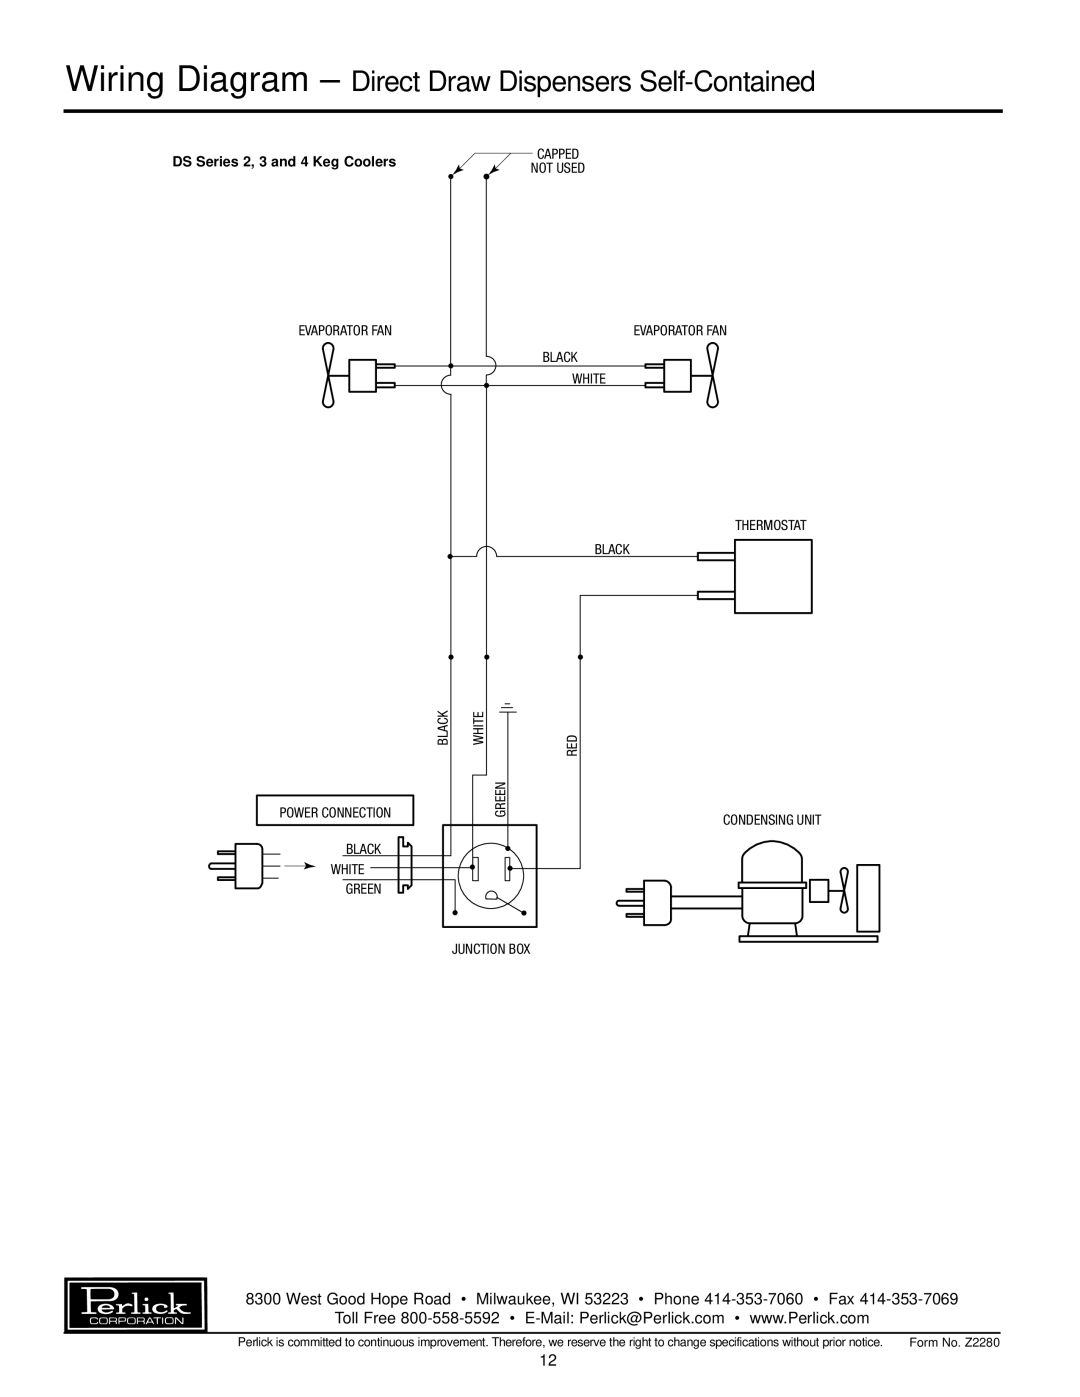 Perlick DP32 Wiring Diagram - Direct Draw Dispensers Self-Contained, DS Series 2, 3 and 4 Keg Coolers, Black, White, Green 